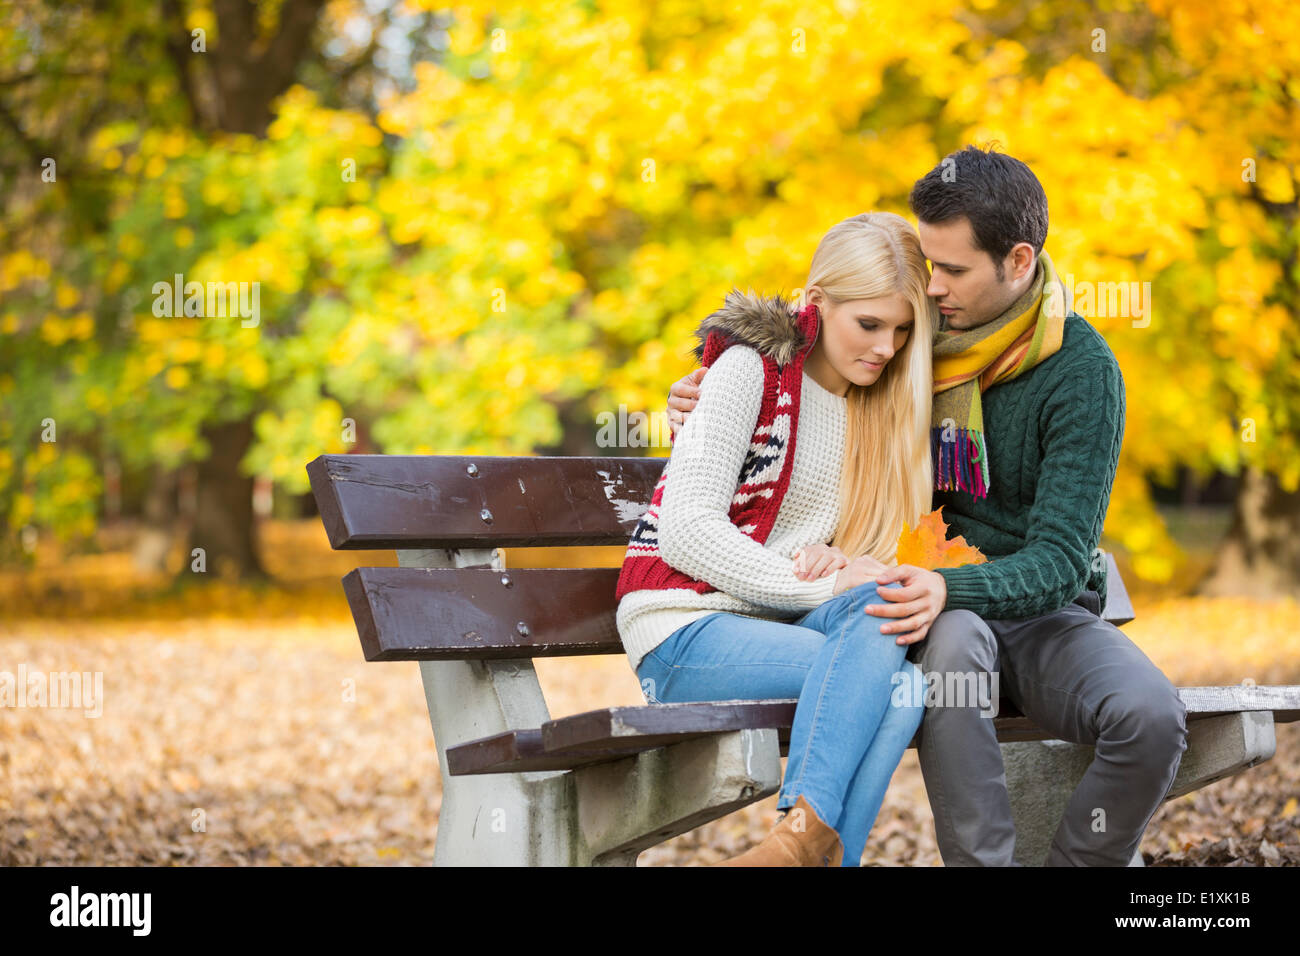 Passionate young man hugging shy woman on park bench during autumn Stock Photo